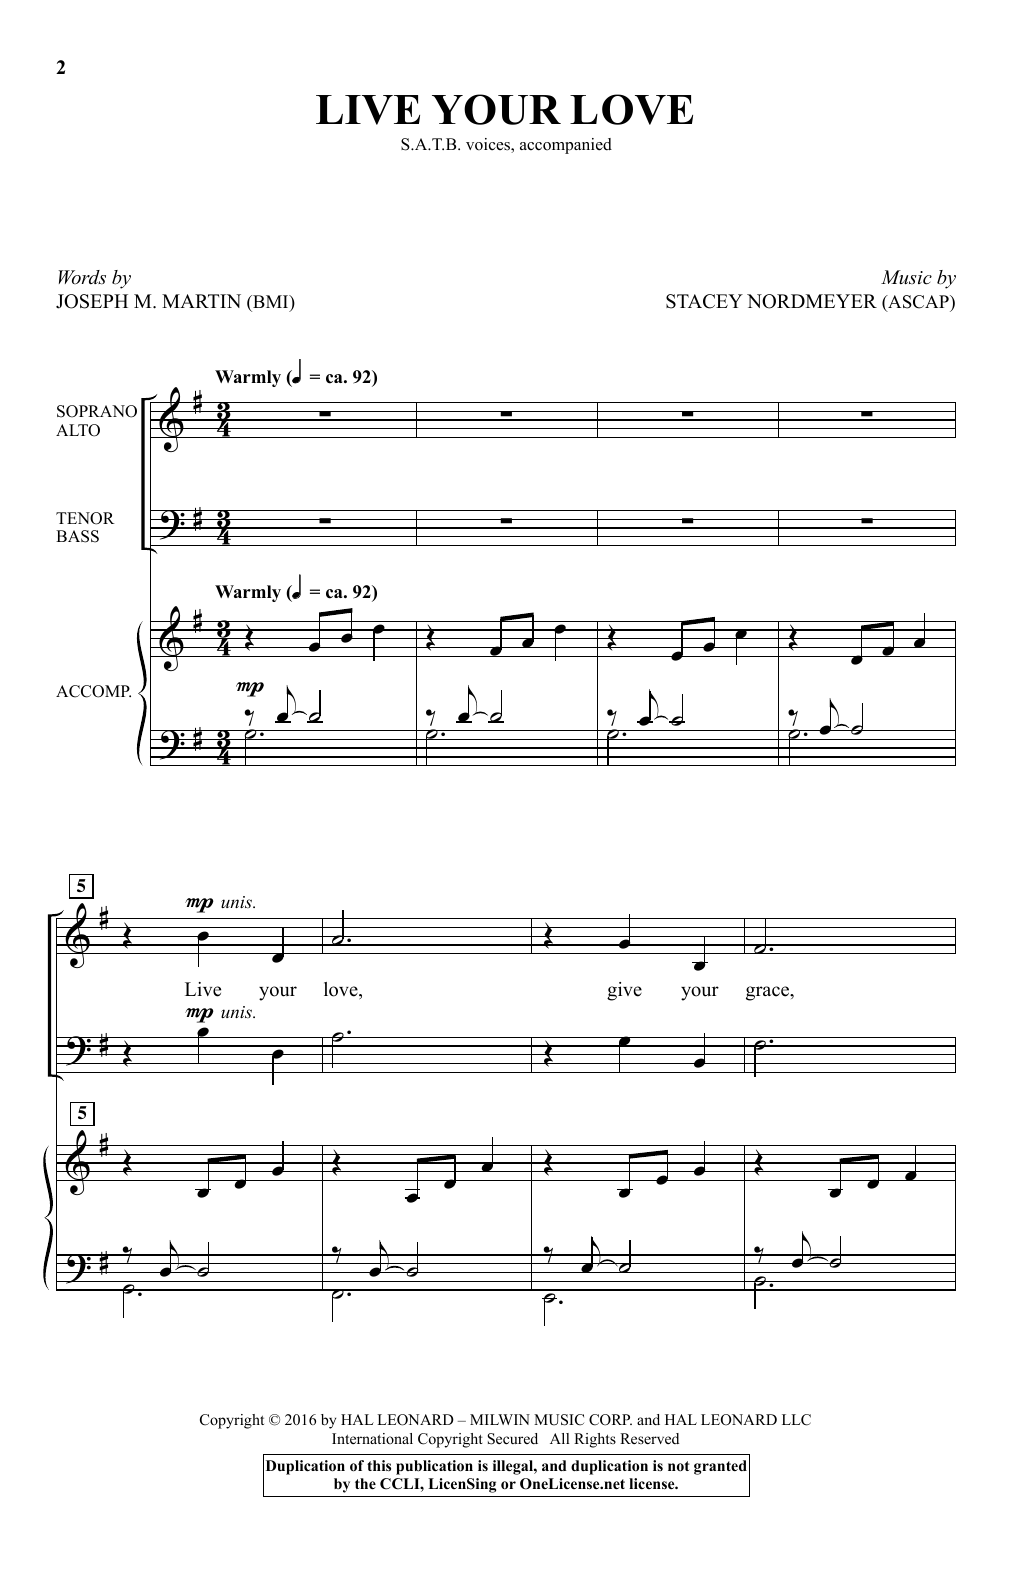 Download Stacey Nordmeyer Live Your Love Sheet Music